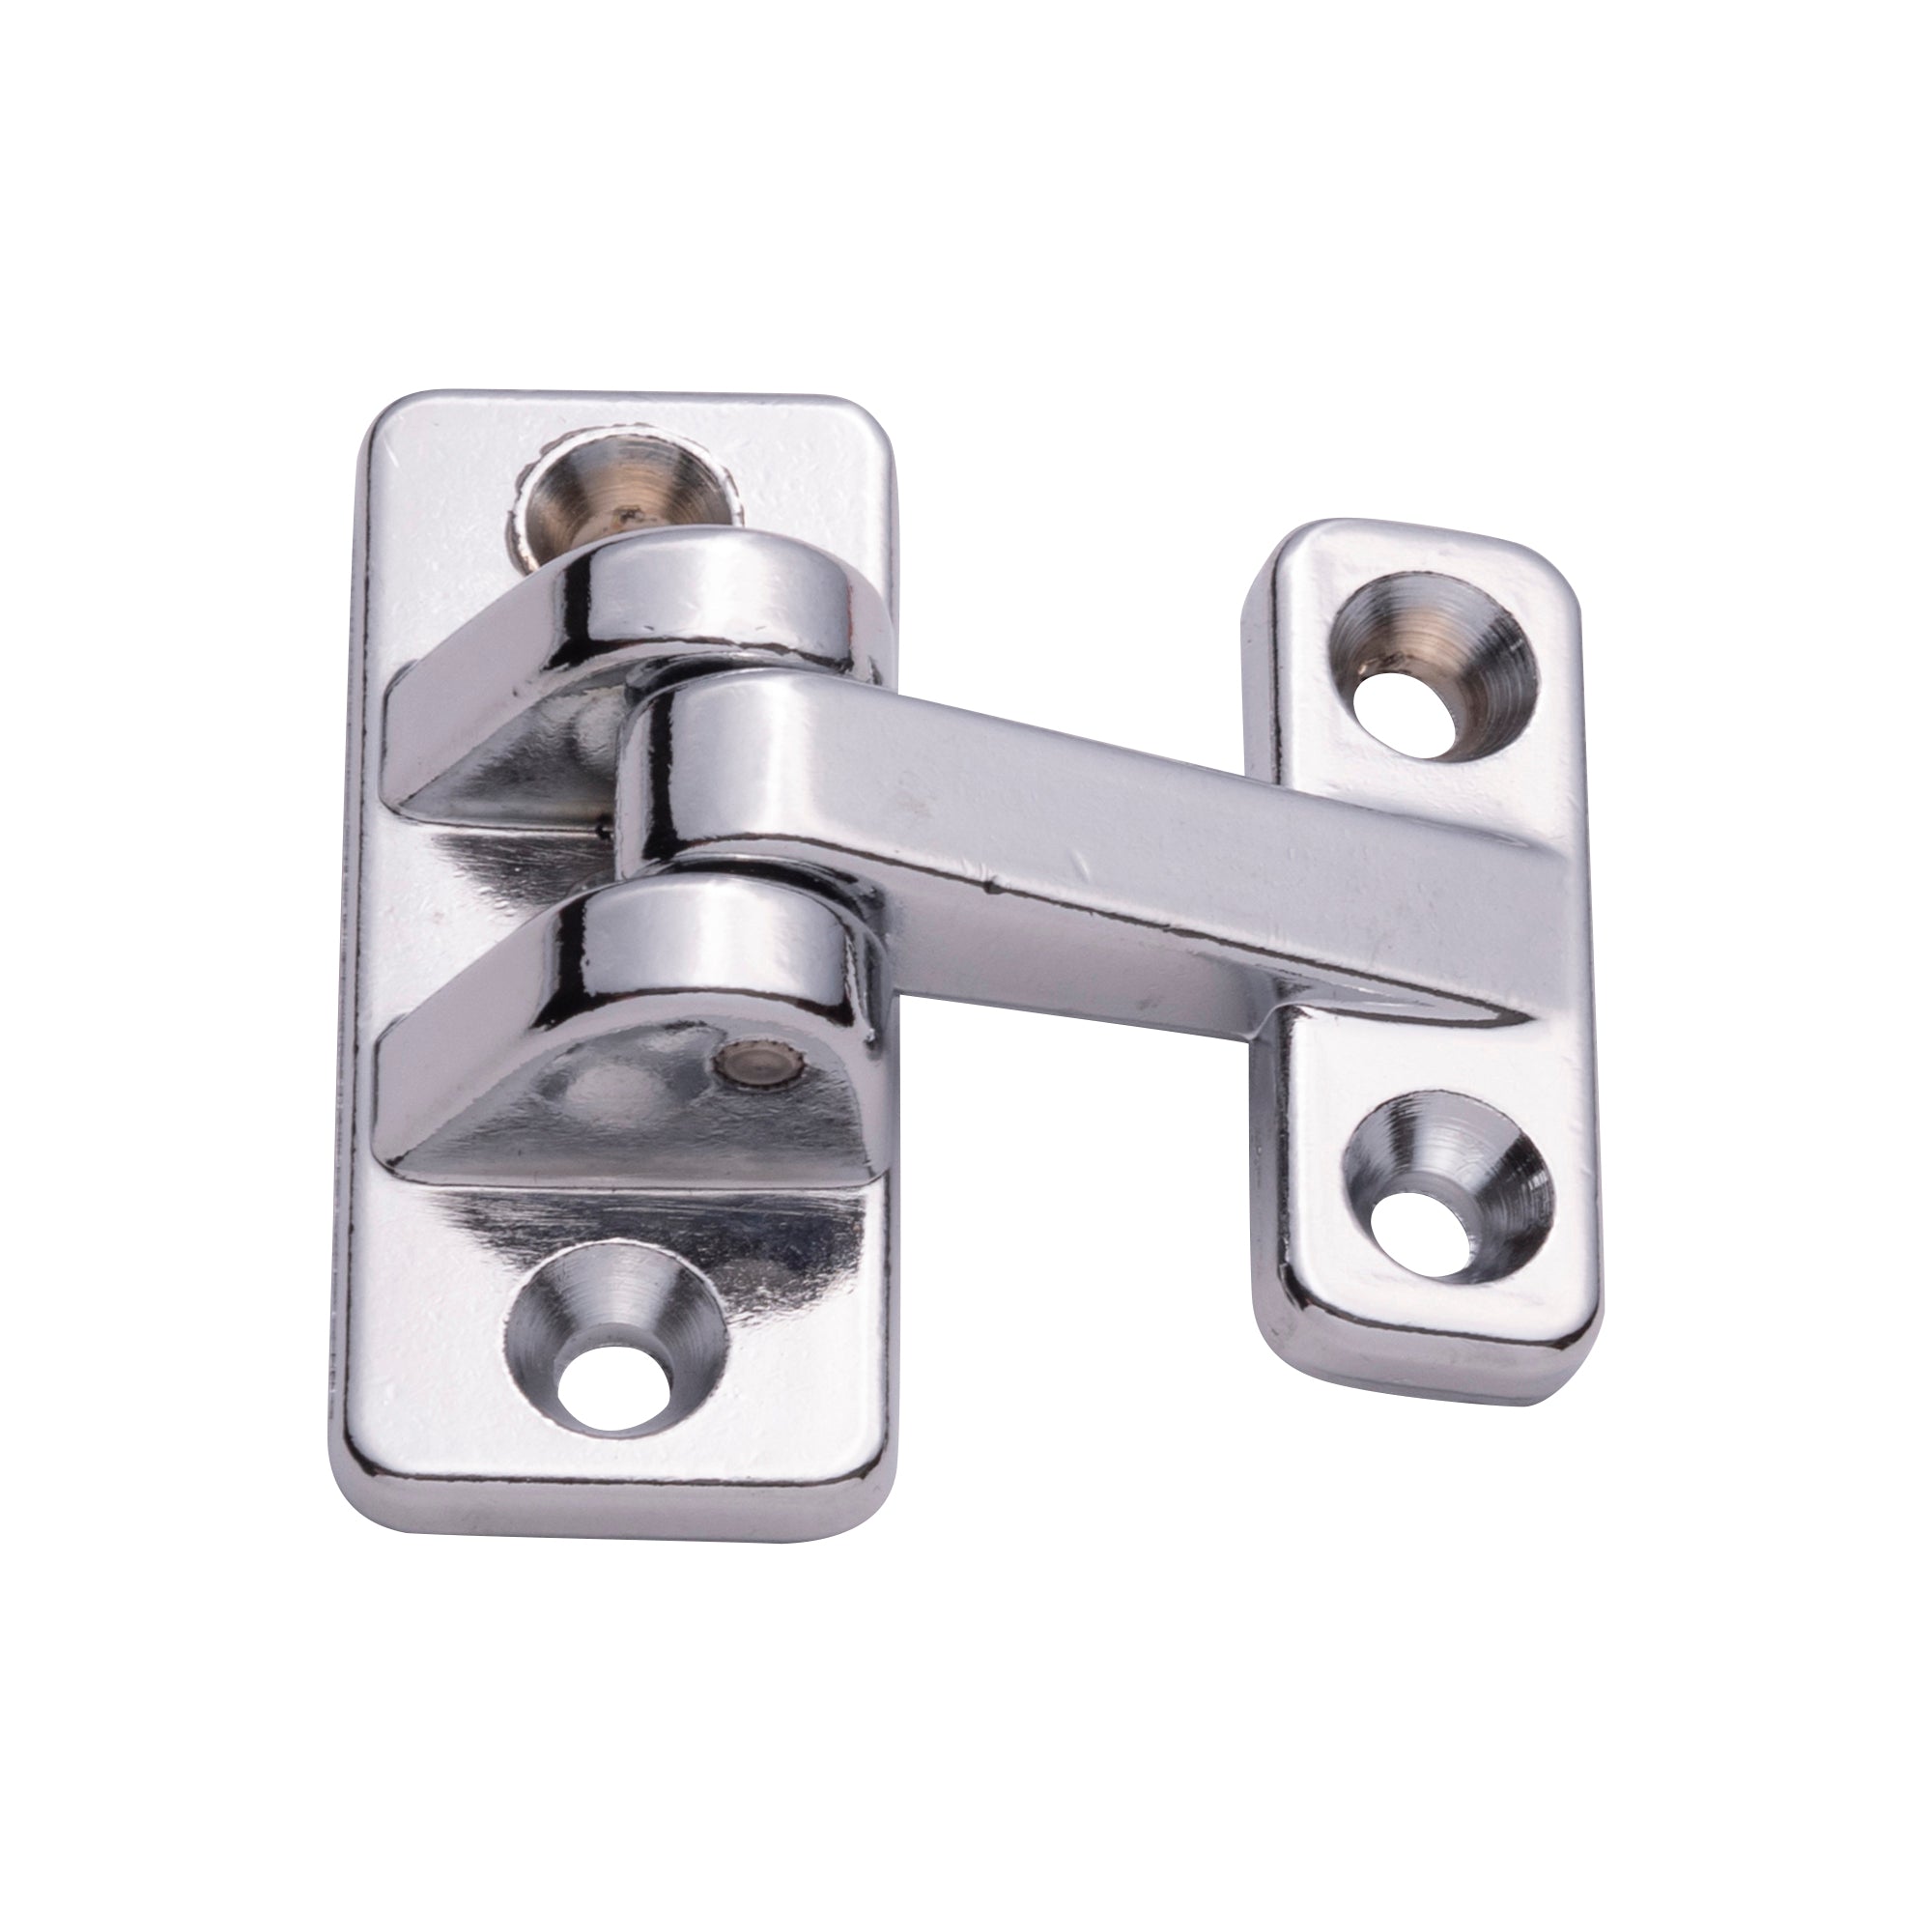 Refrigeration Hinges - Economy Zinc Die-Cast - 5/16" Inch Offset - Chrome Finish - Sold Individually